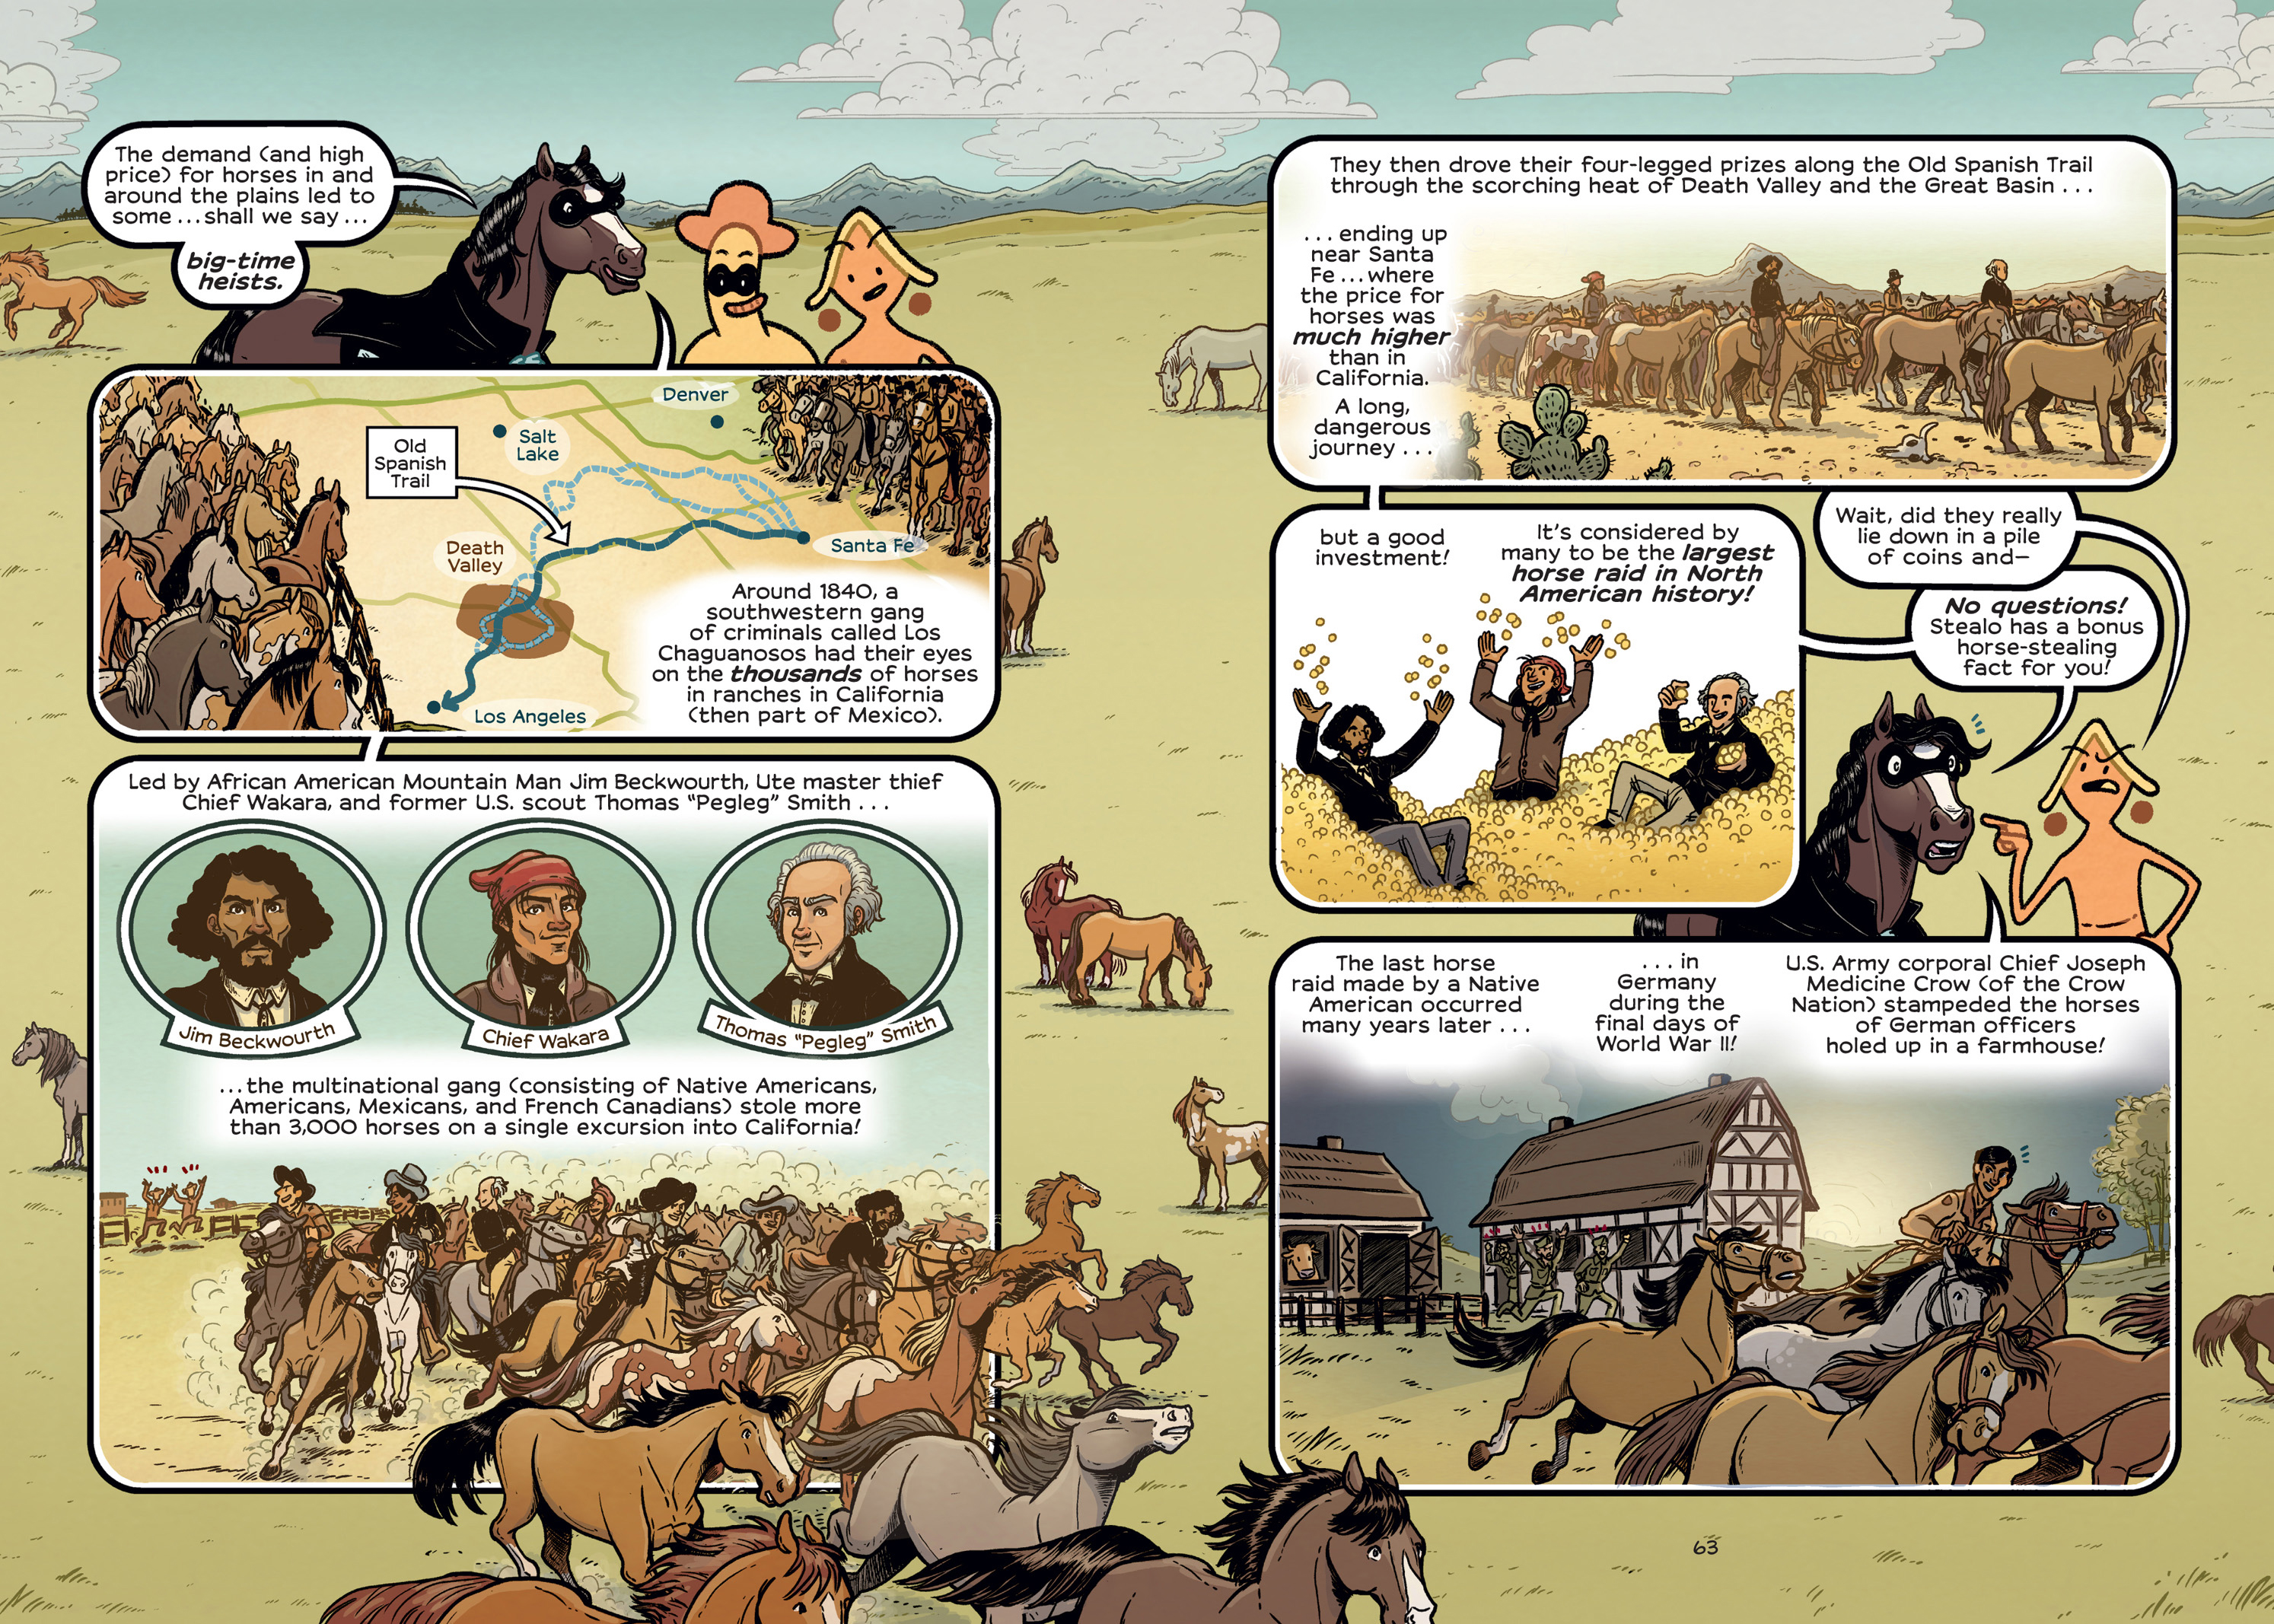 Read online History Comics comic -  Issue # The Wild Mustang - Horses of the American West - 64